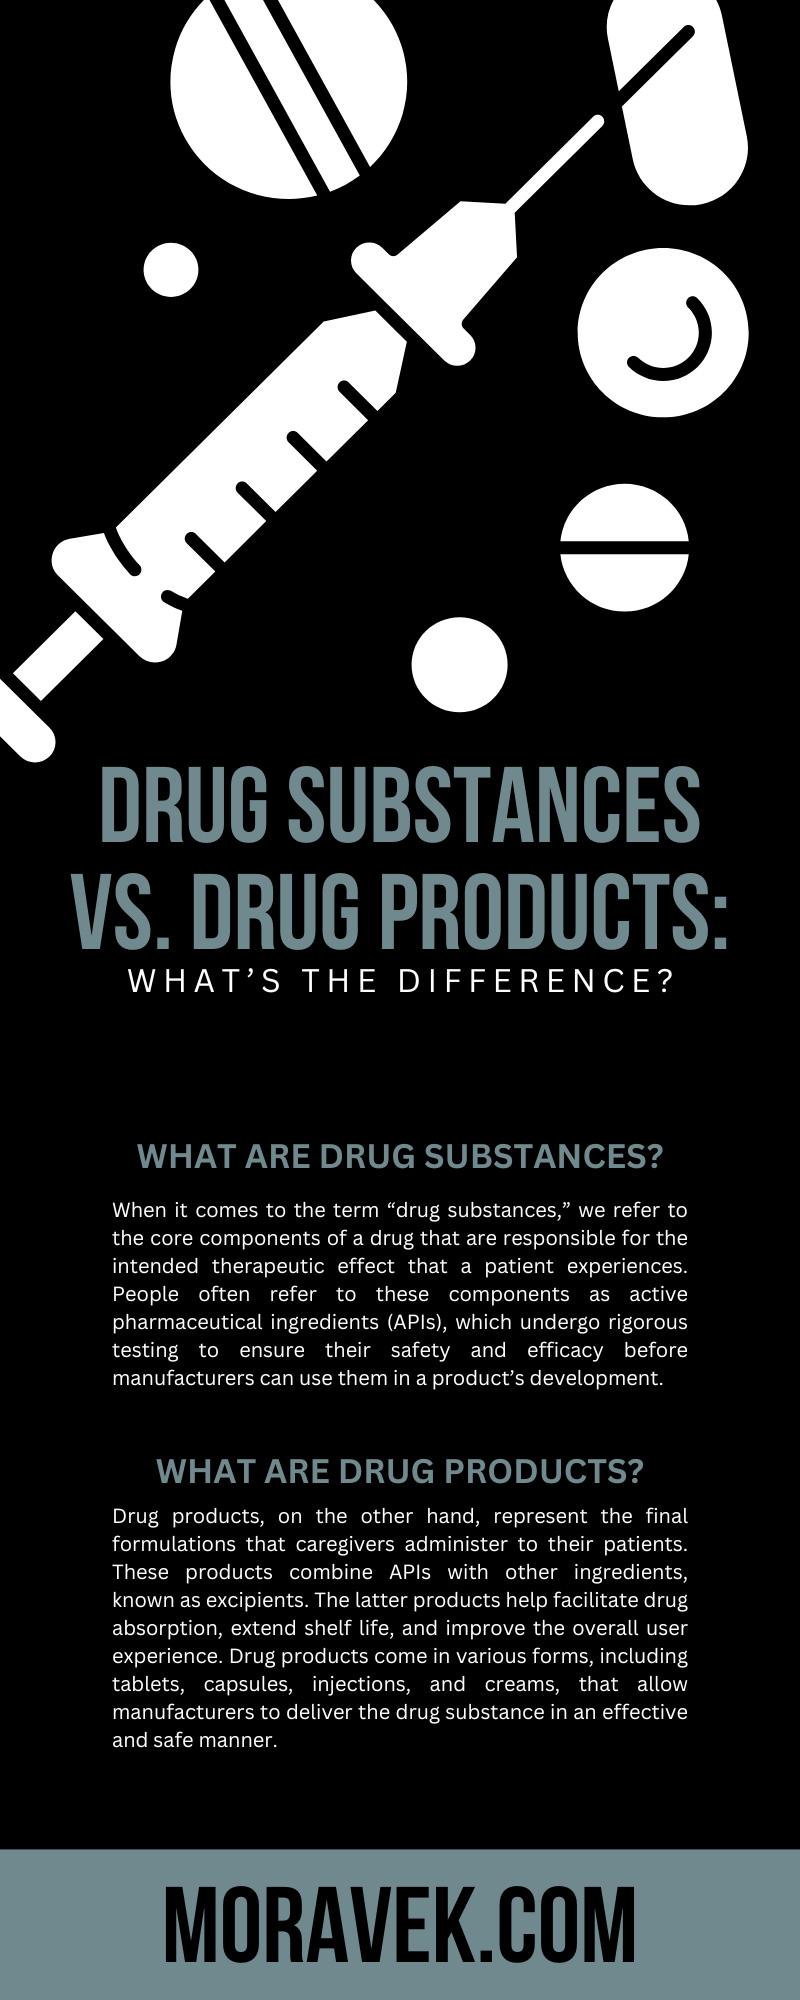 Drug Substances vs. Drug Products: What’s the Difference?